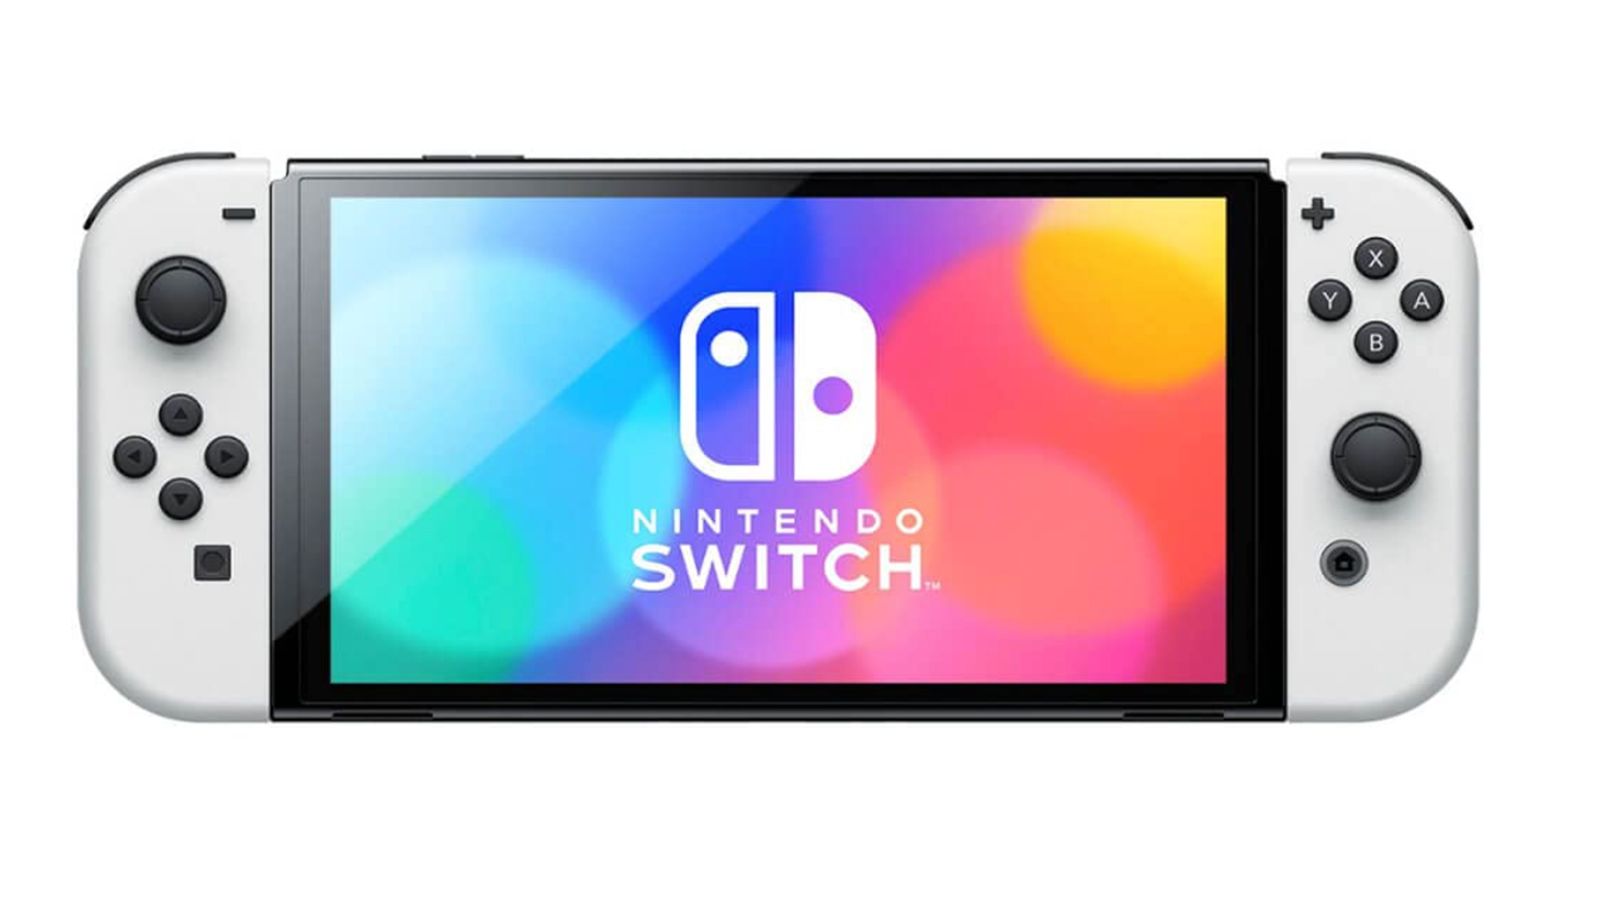 Nintendo Switch buying guide: What you need to know - Android Authority